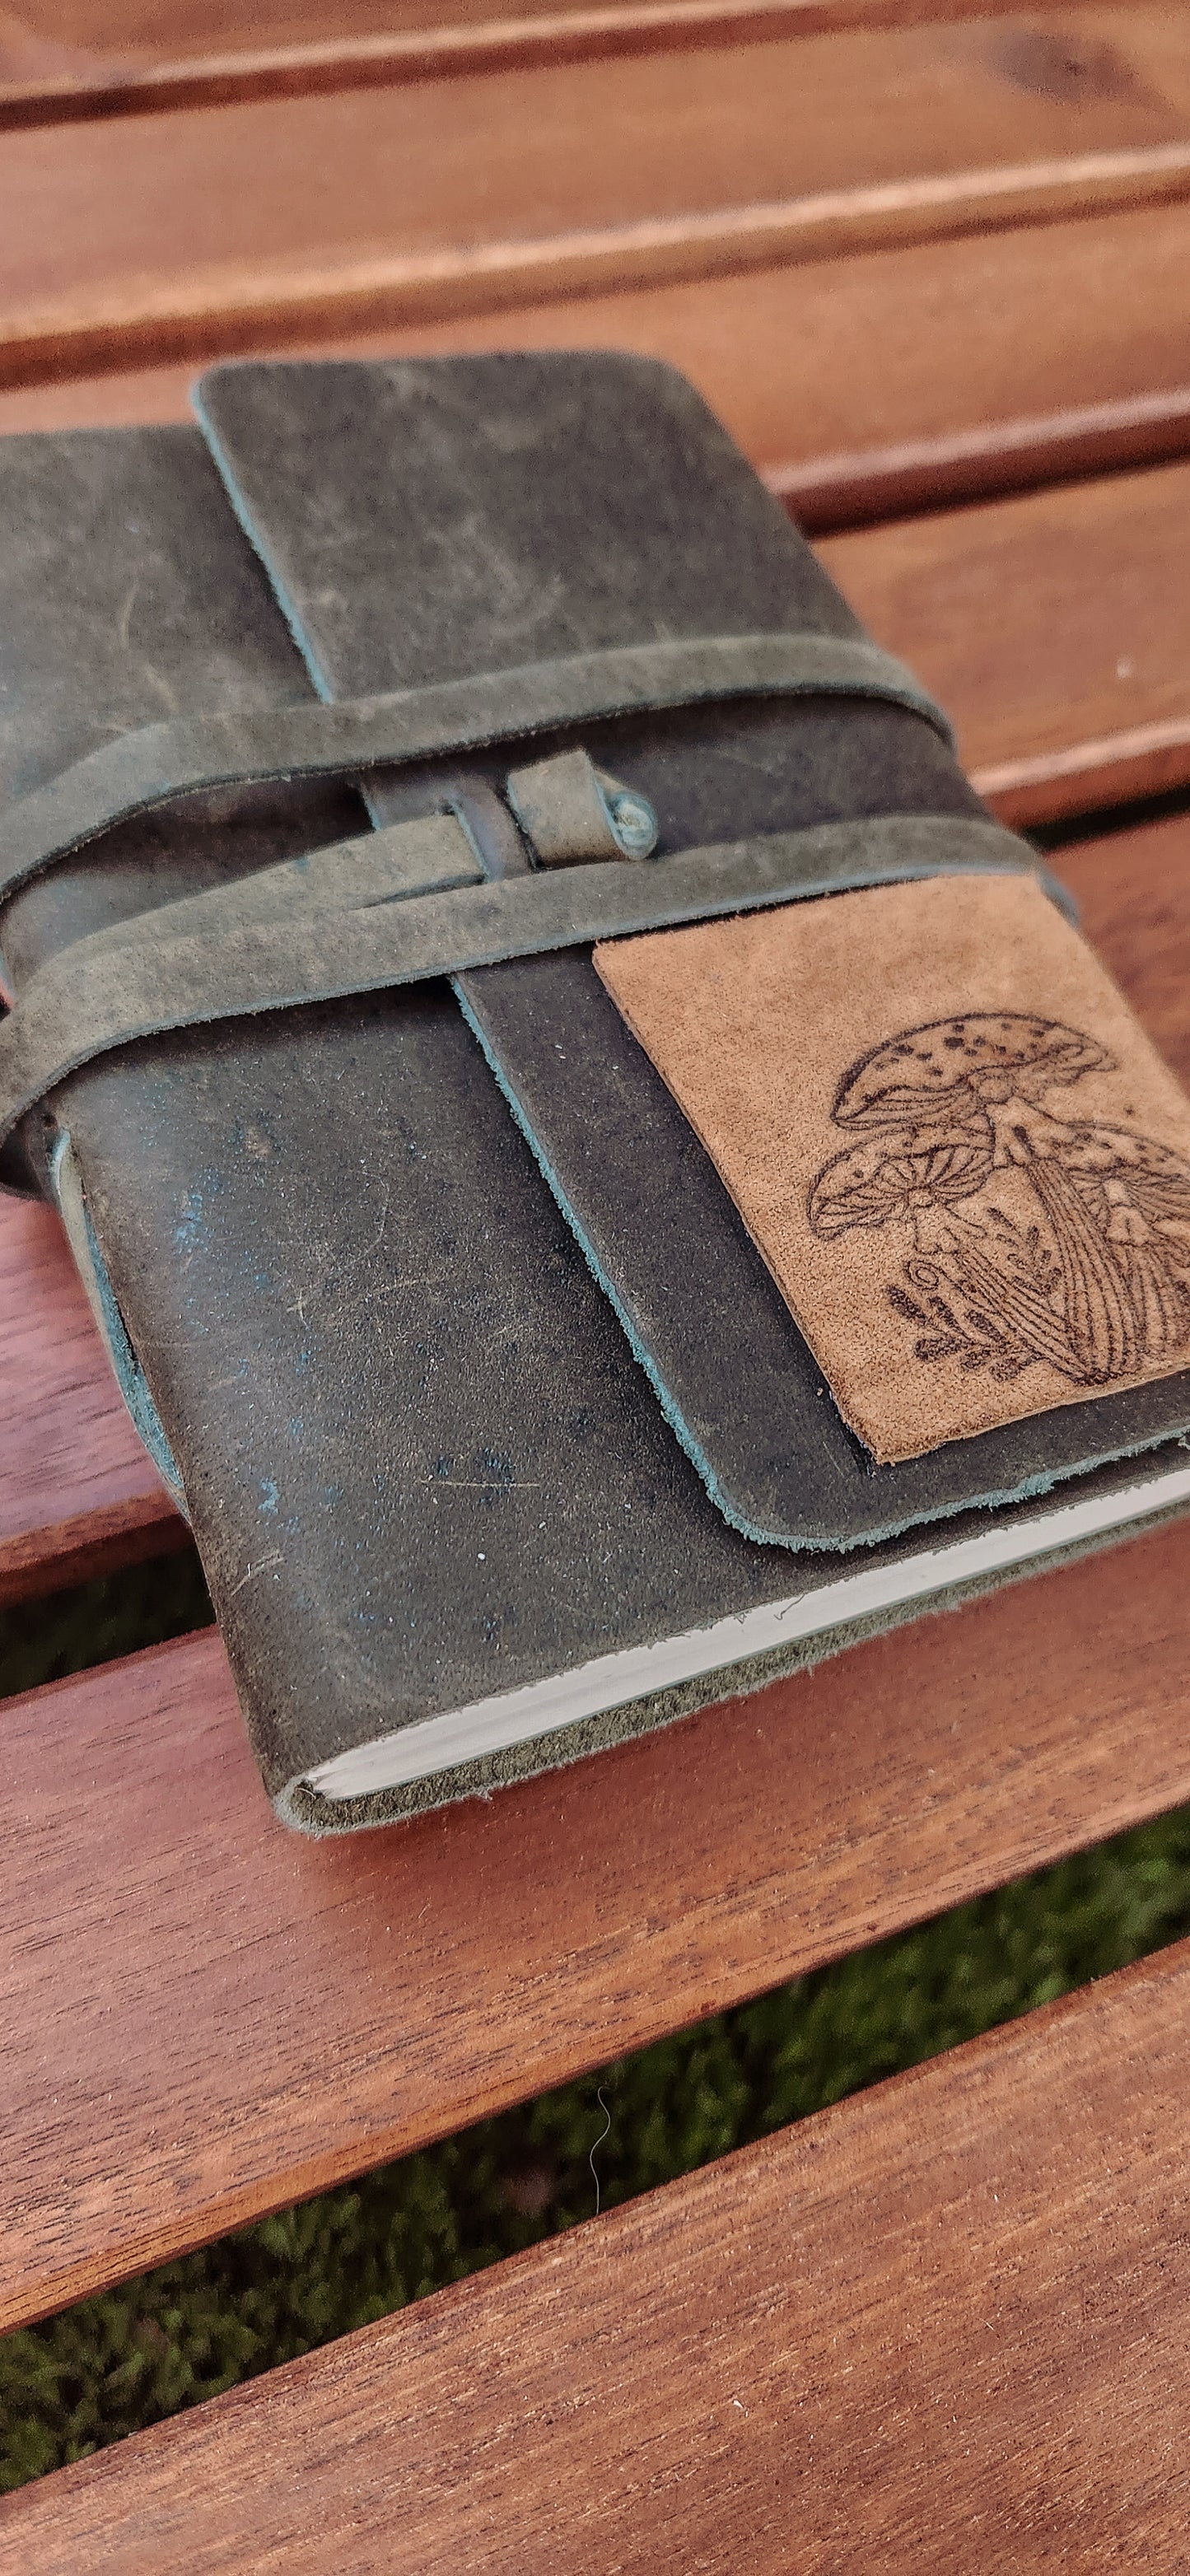 The mushroom Patch leather journal